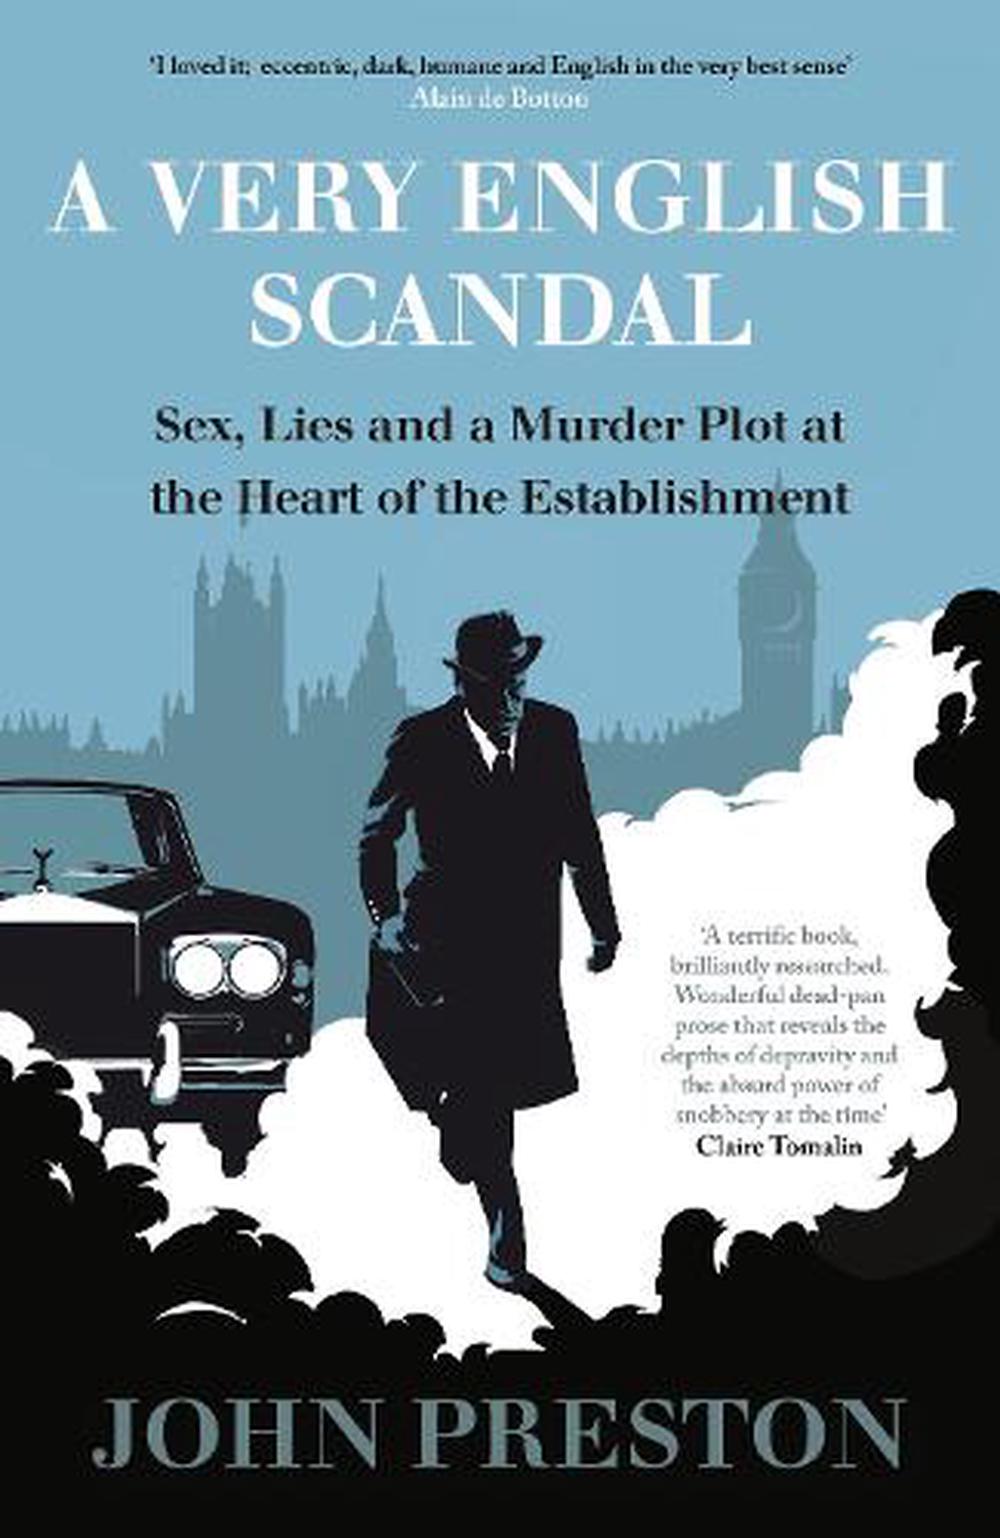 a very english scandal book review